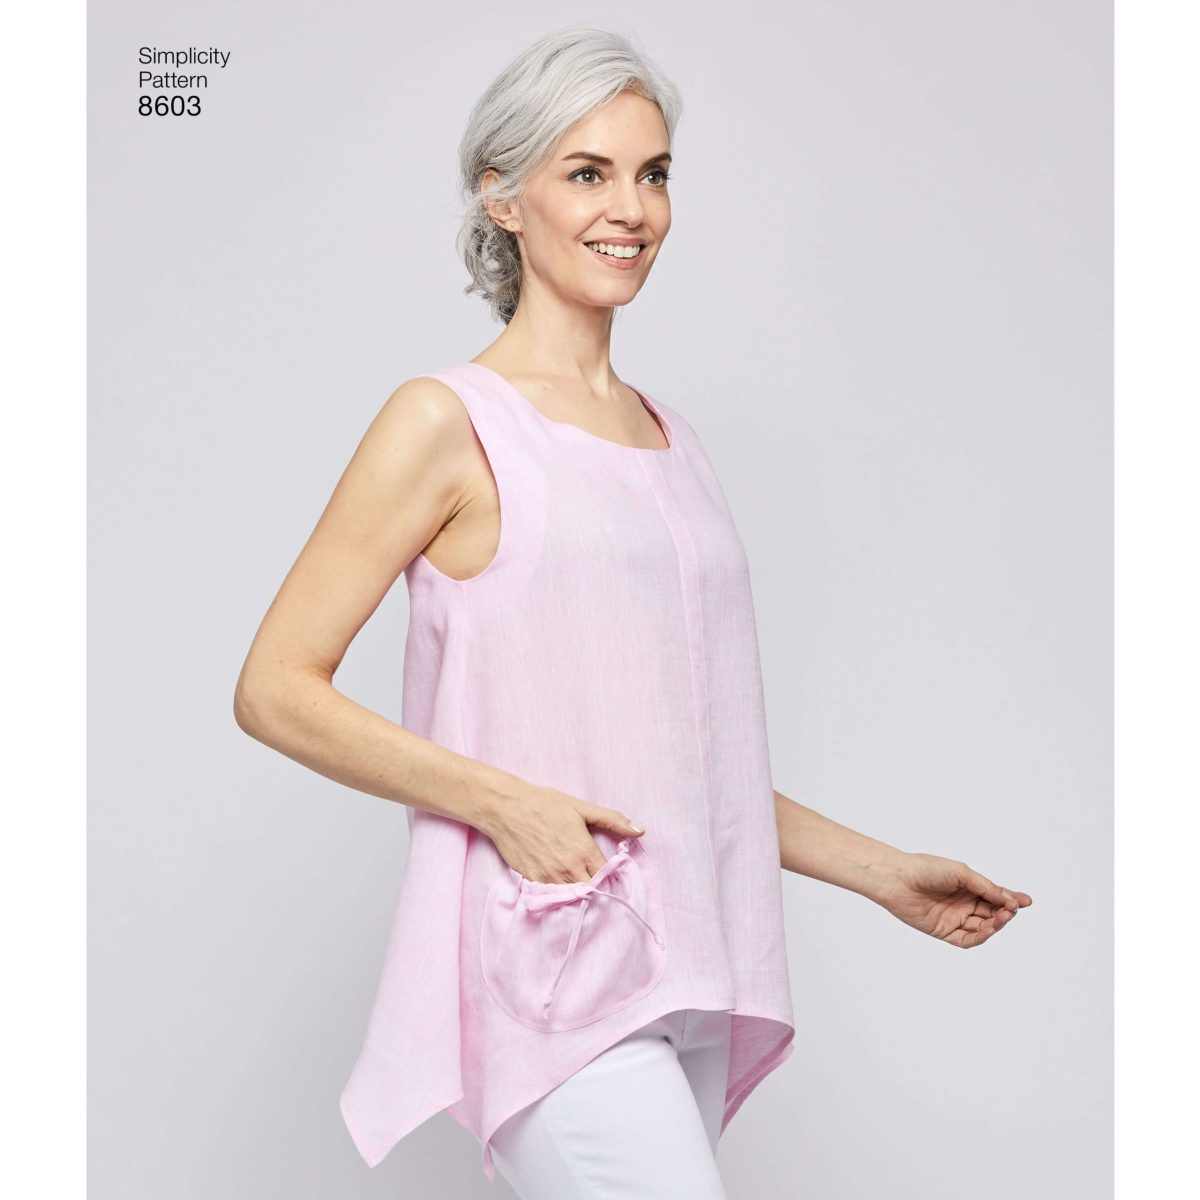 Simplicity Sewing Pattern 8603 Misses' Pullover Tops by Elaine Heigl